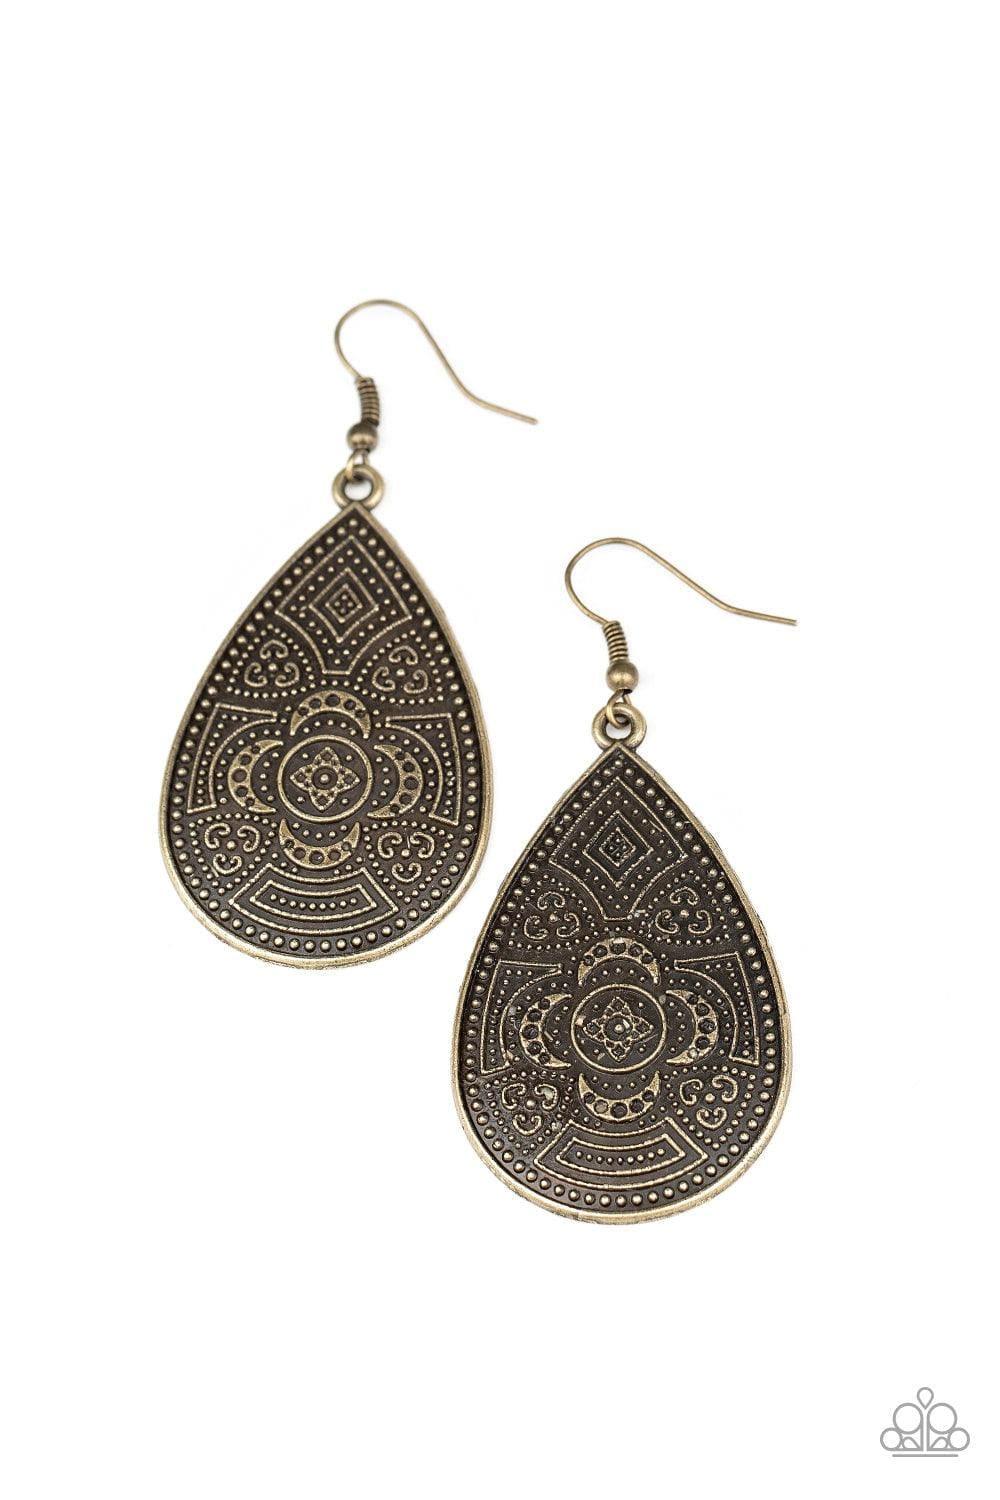 Paparazzi Accessories - Tribal Takeover - Brass Earrings - Bling by JessieK